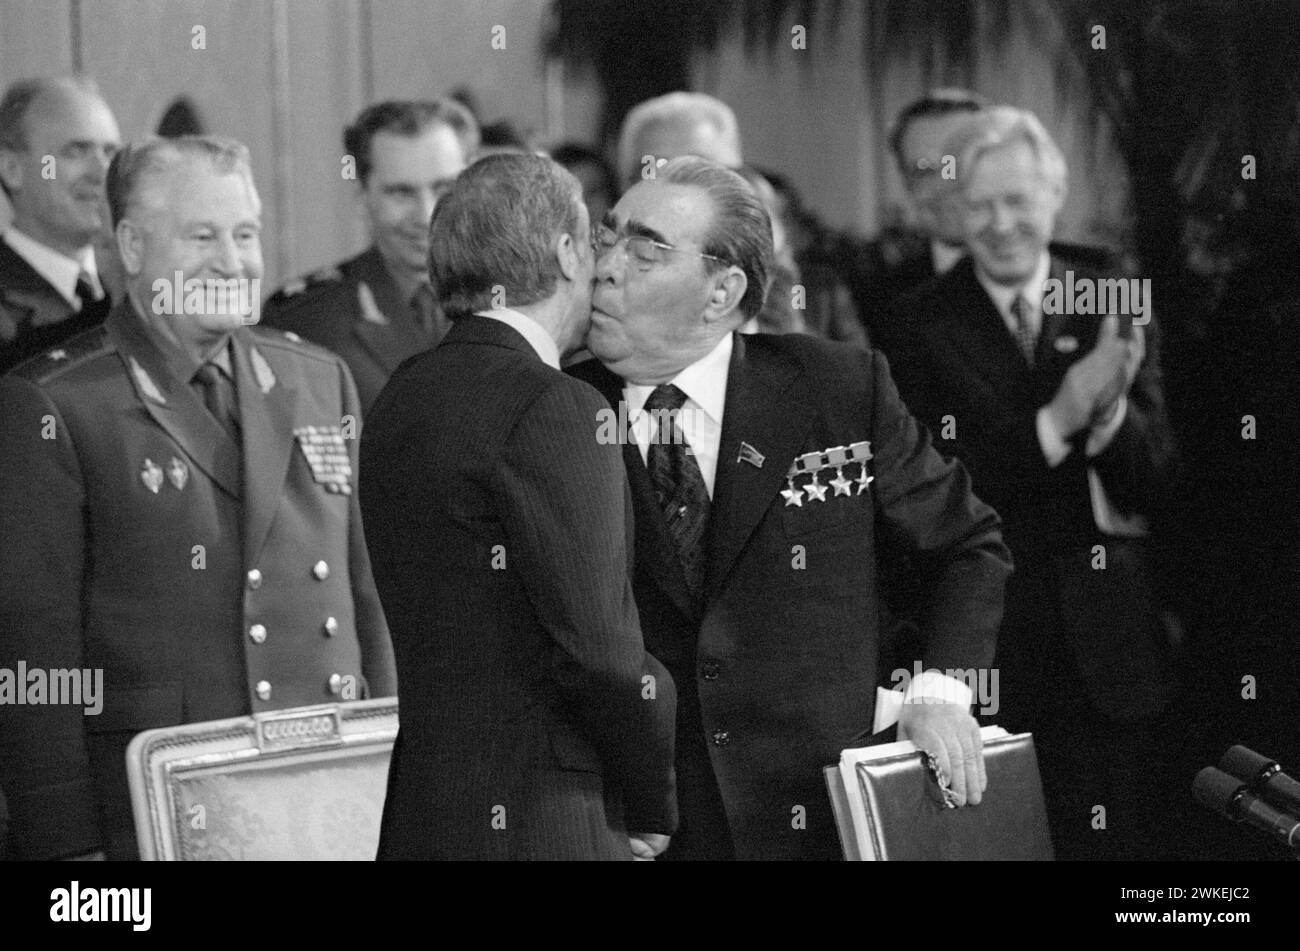 Leonid Brezhnev and US President Jimmy Carter after the signing of the SALT II treaty in Vienna in 1979. Museum: PRIVATE COLLECTION. Author: ANONYMOUS. Stock Photo